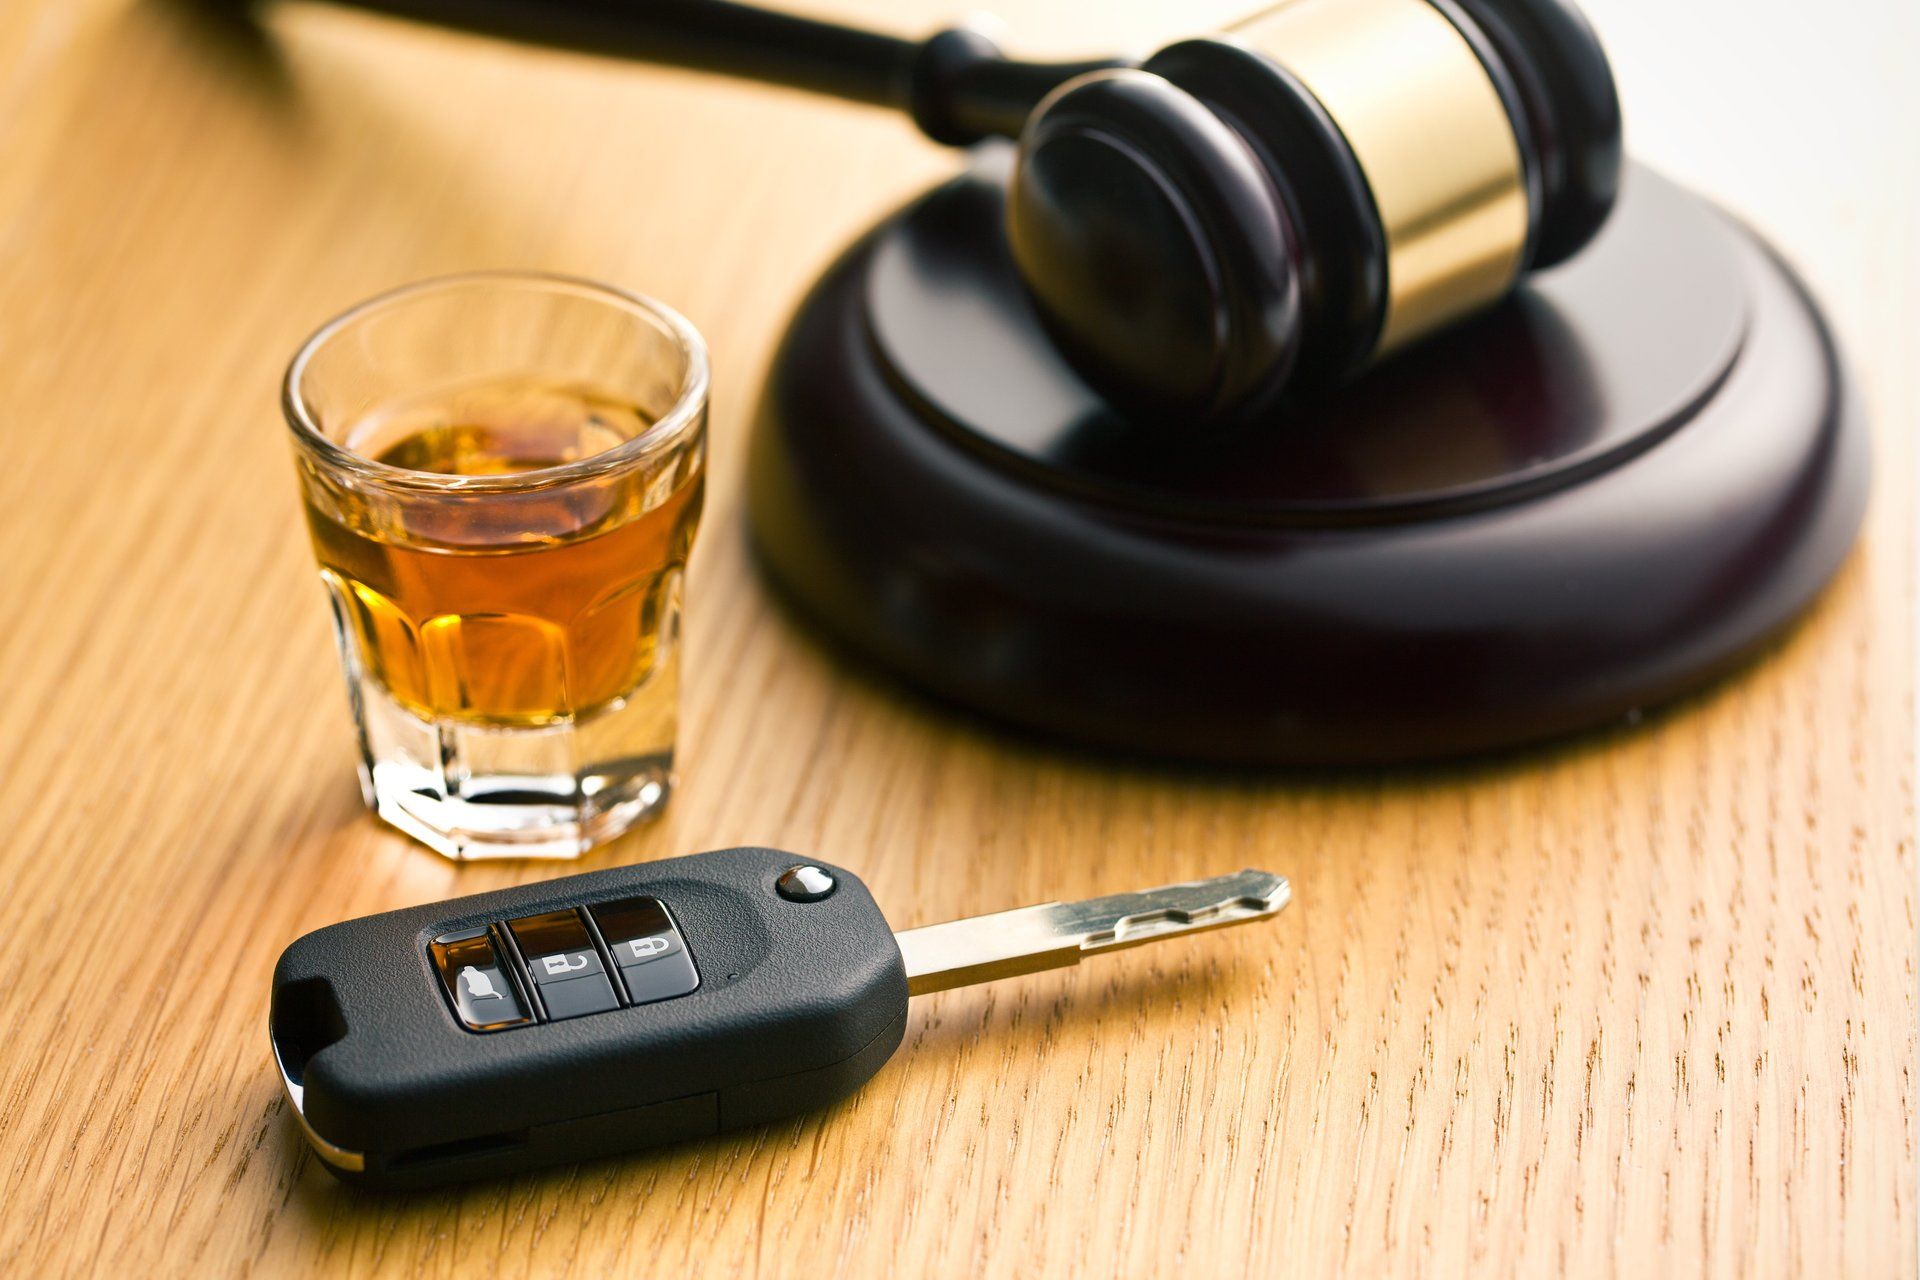 An image of a car key and a glass of whisky and a law gavel on a wood desk